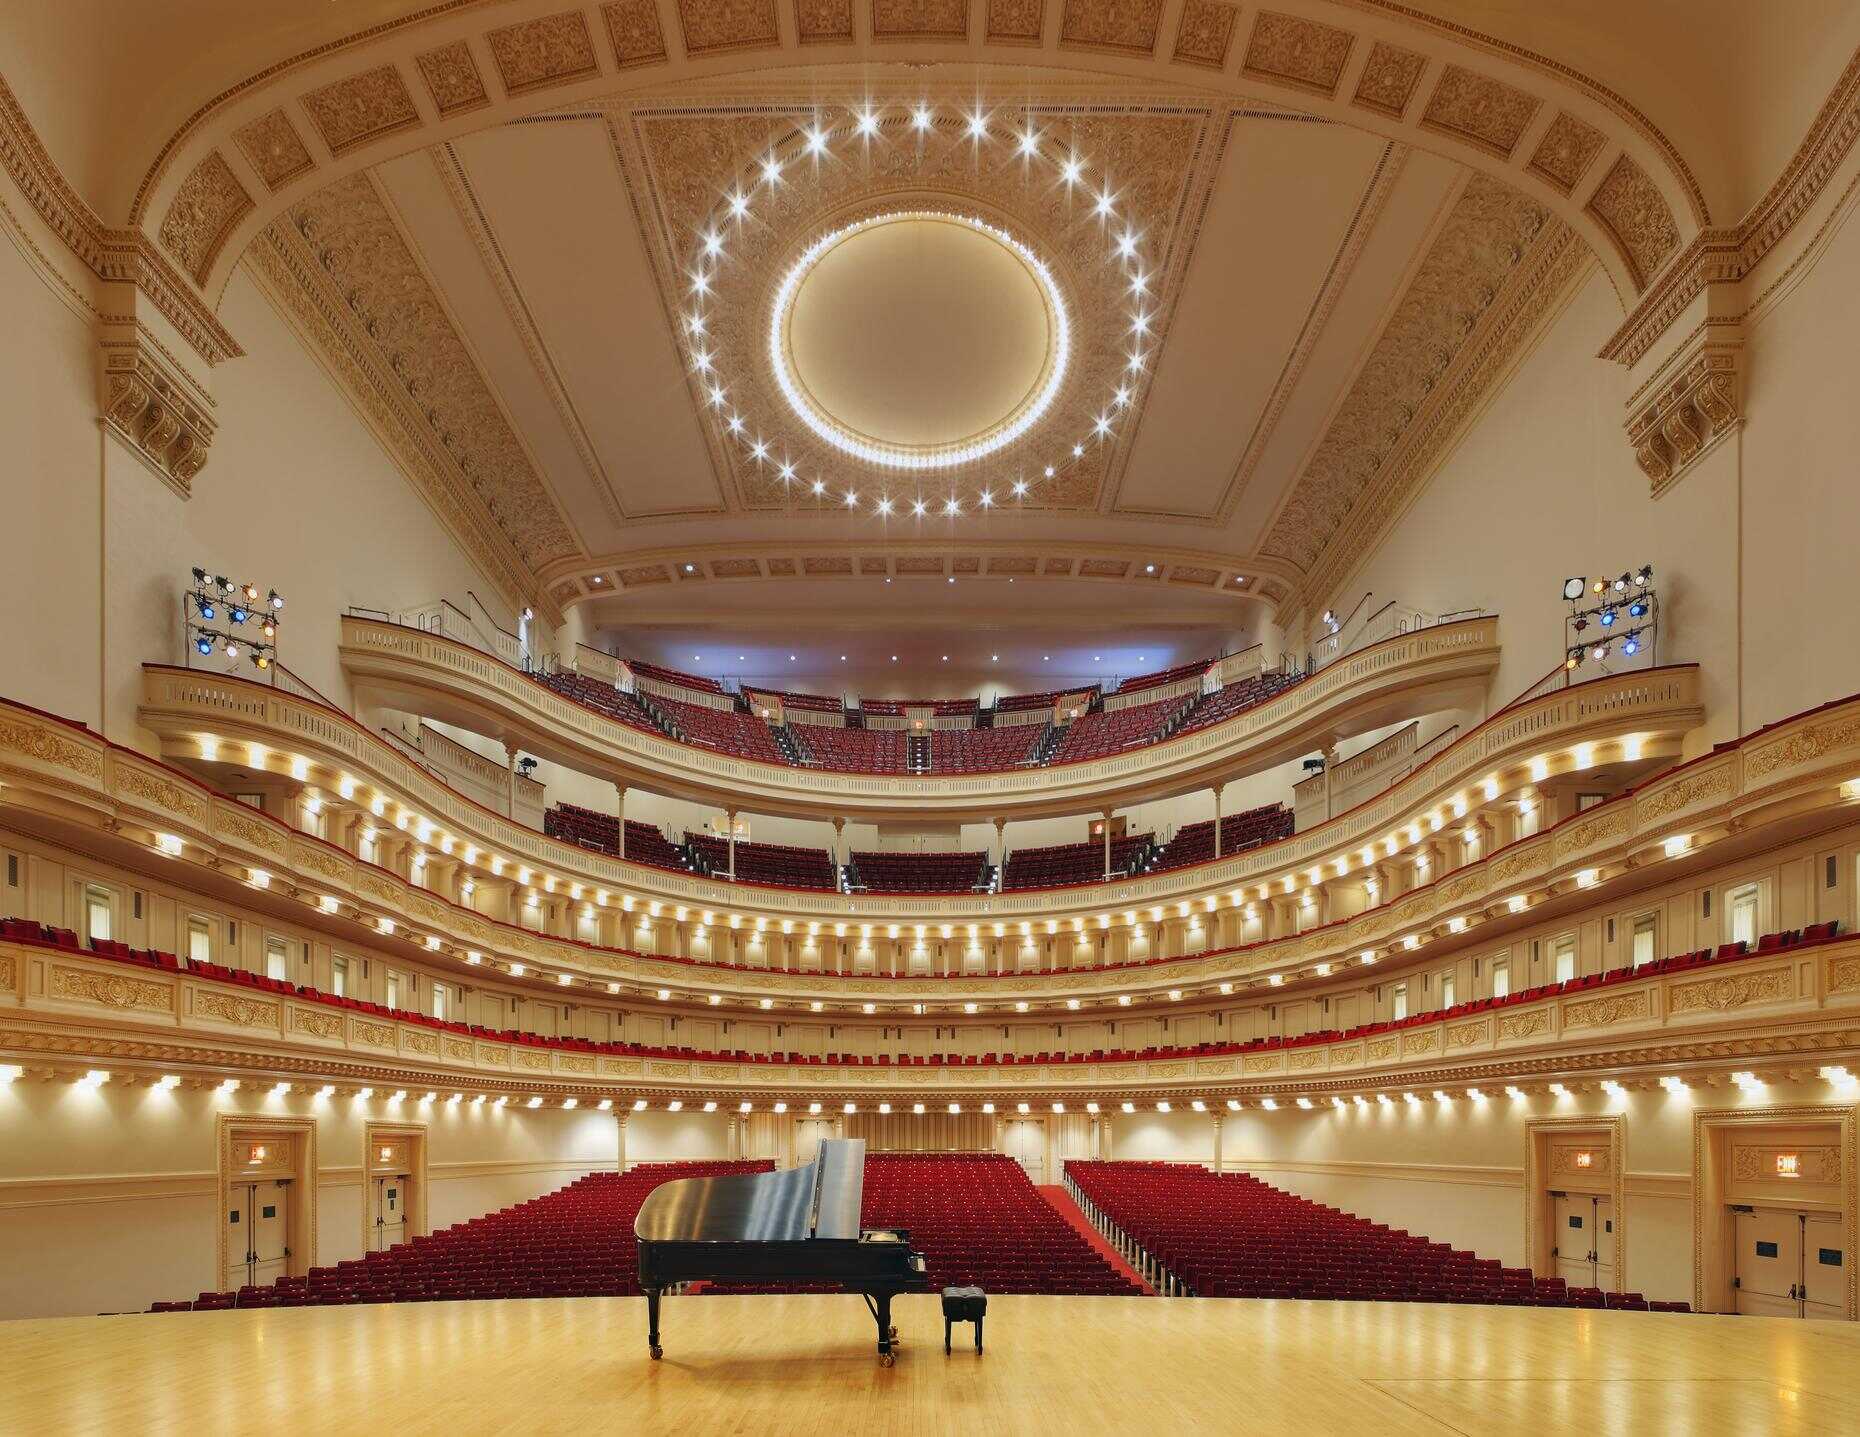 What Are The Best Seats For An Orchestra Concert?